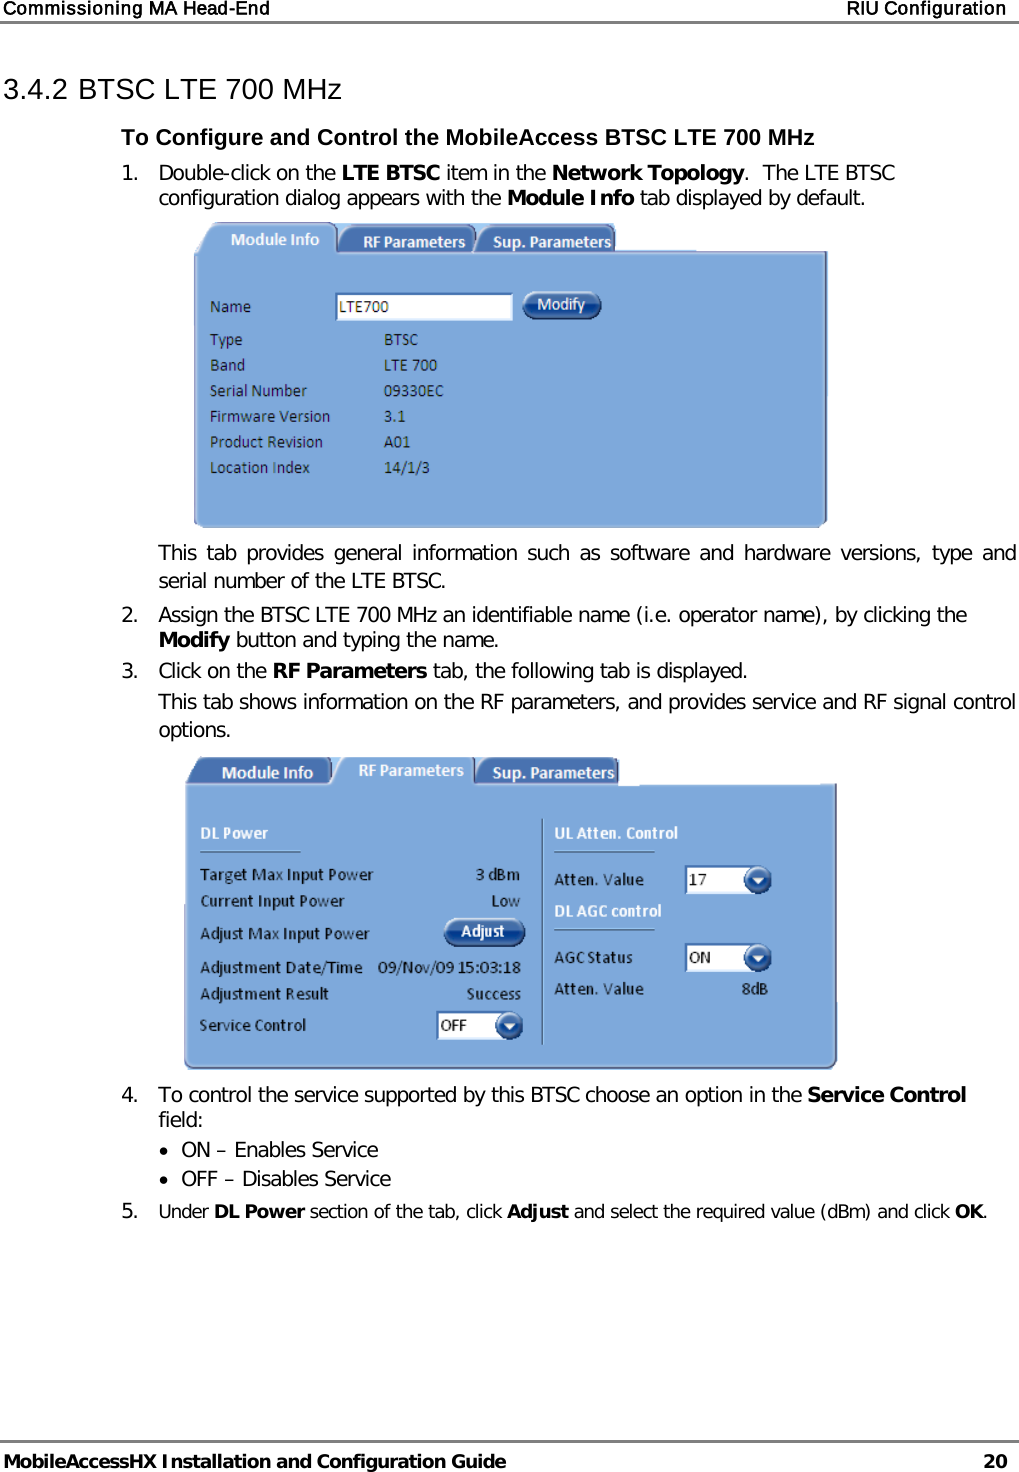 Commissioning MA Head-End    RIU Configuration   MobileAccessHX Installation and Configuration Guide   20  3.4.2 BTSC LTE 700 MHz To Configure and Control the MobileAccess BTSC LTE 700 MHz 1.  Double-click on the LTE BTSC item in the Network Topology.  The LTE BTSC configuration dialog appears with the Module Info tab displayed by default.   This tab provides general information such as software and hardware versions, type and serial number of the LTE BTSC. 2.  Assign the BTSC LTE 700 MHz an identifiable name (i.e. operator name), by clicking the Modify button and typing the name.  3.  Click on the RF Parameters tab, the following tab is displayed. This tab shows information on the RF parameters, and provides service and RF signal control options.  4.  To control the service supported by this BTSC choose an option in the Service Control field: • ON – Enables Service • OFF – Disables Service 5.  Under DL Power section of the tab, click Adjust and select the required value (dBm) and click OK. 